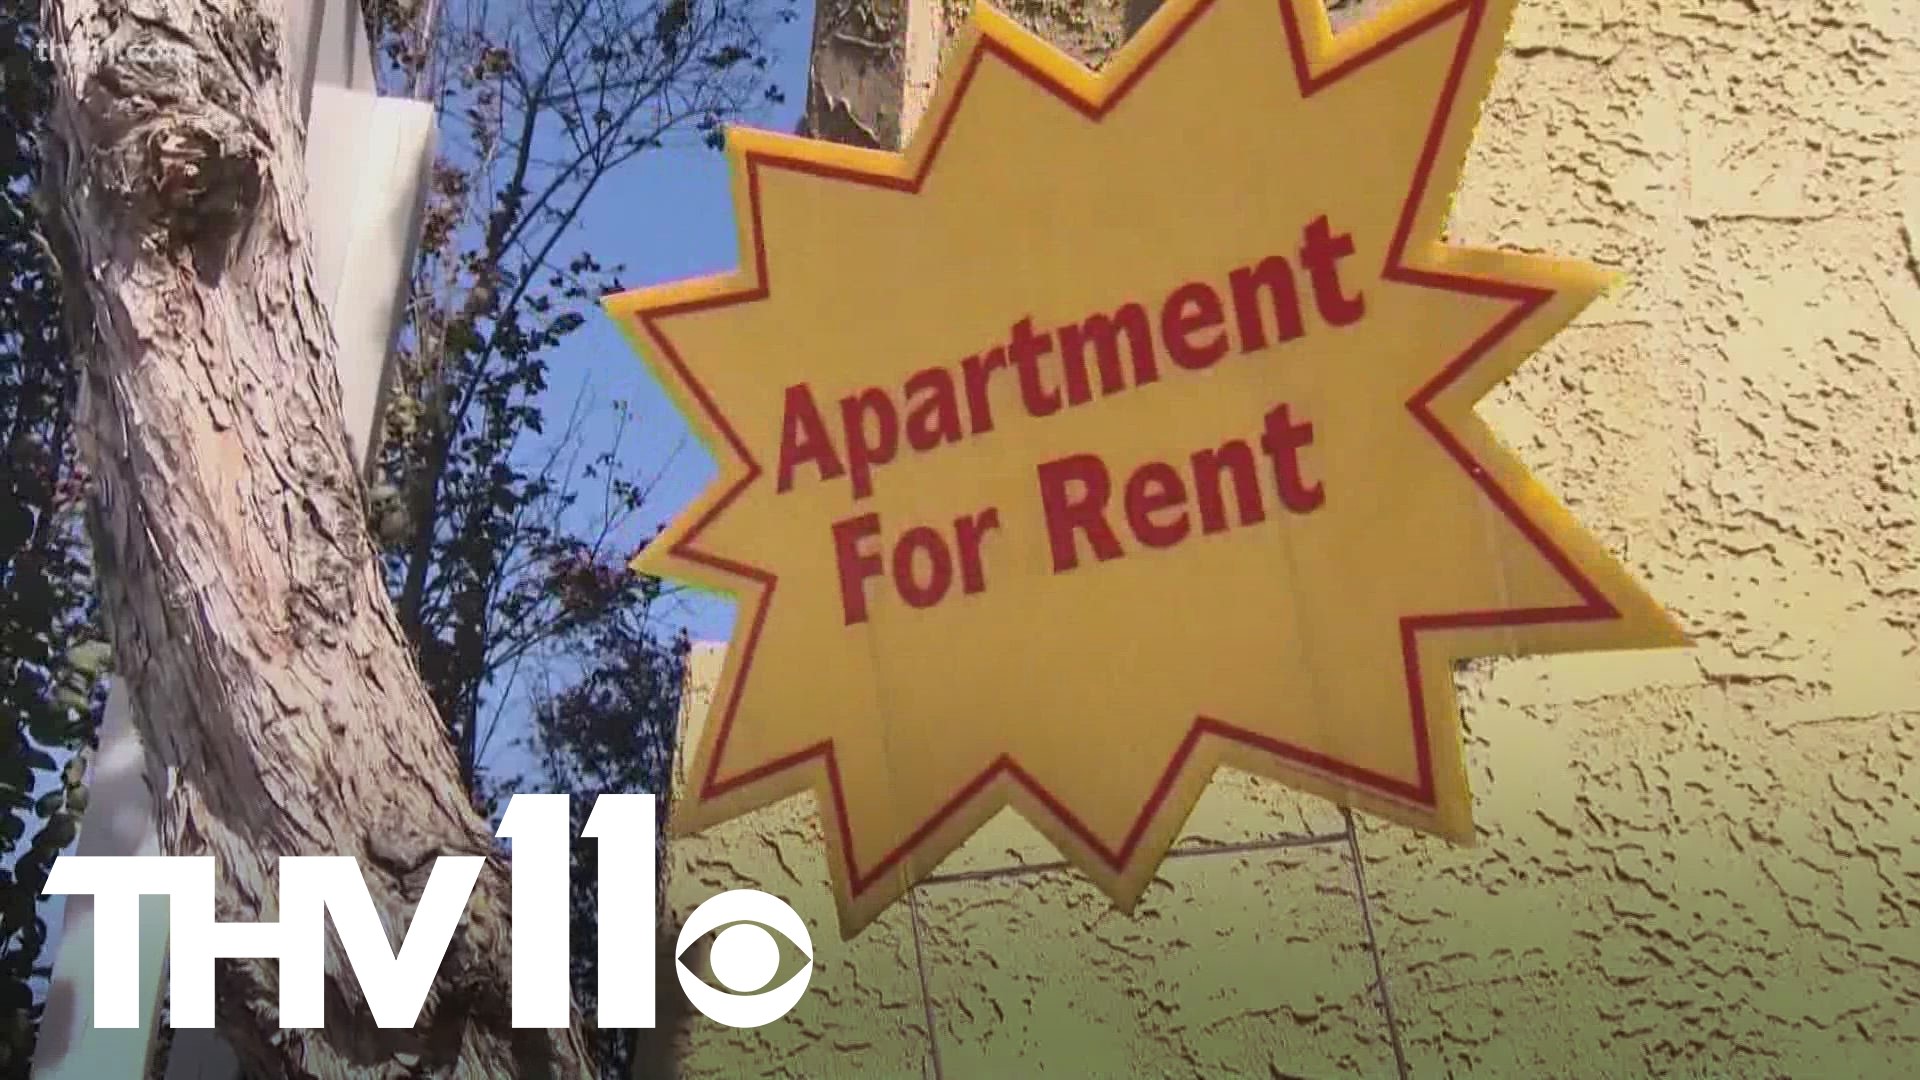 On Wednesday, the White House announced a new plan to help fight the high cost of rent.